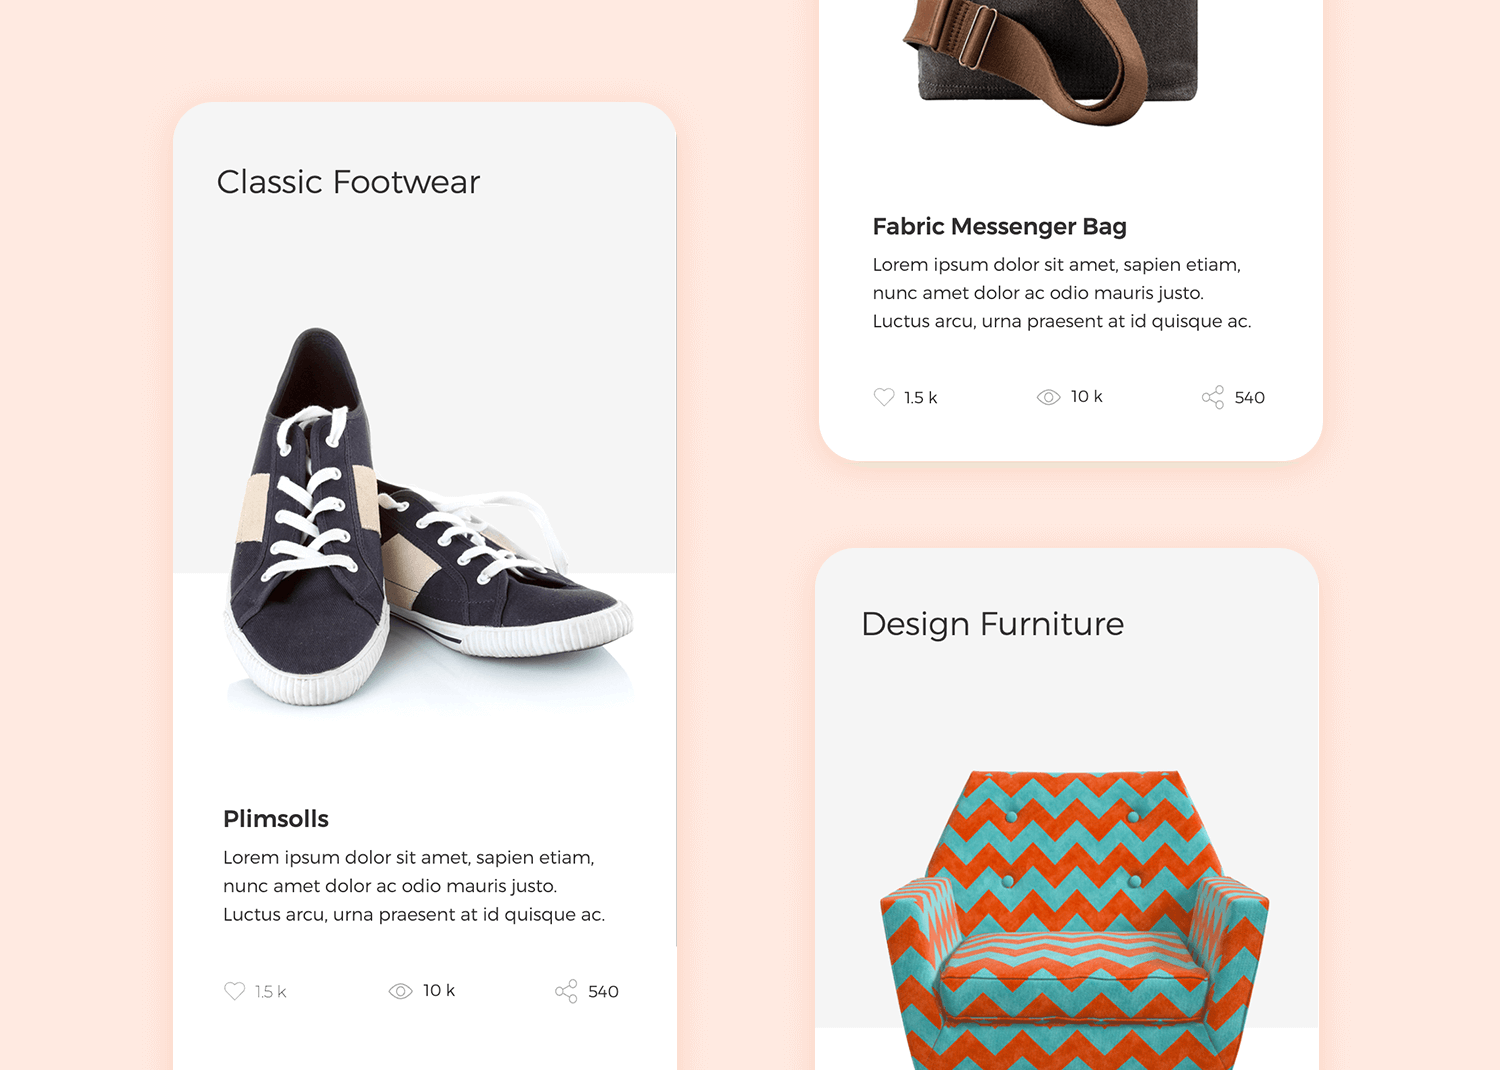 Product showcase mobile app mockup displaying classic footwear, fabric messenger bags, and design furniture with user engagement metrics like likes, views, and shares